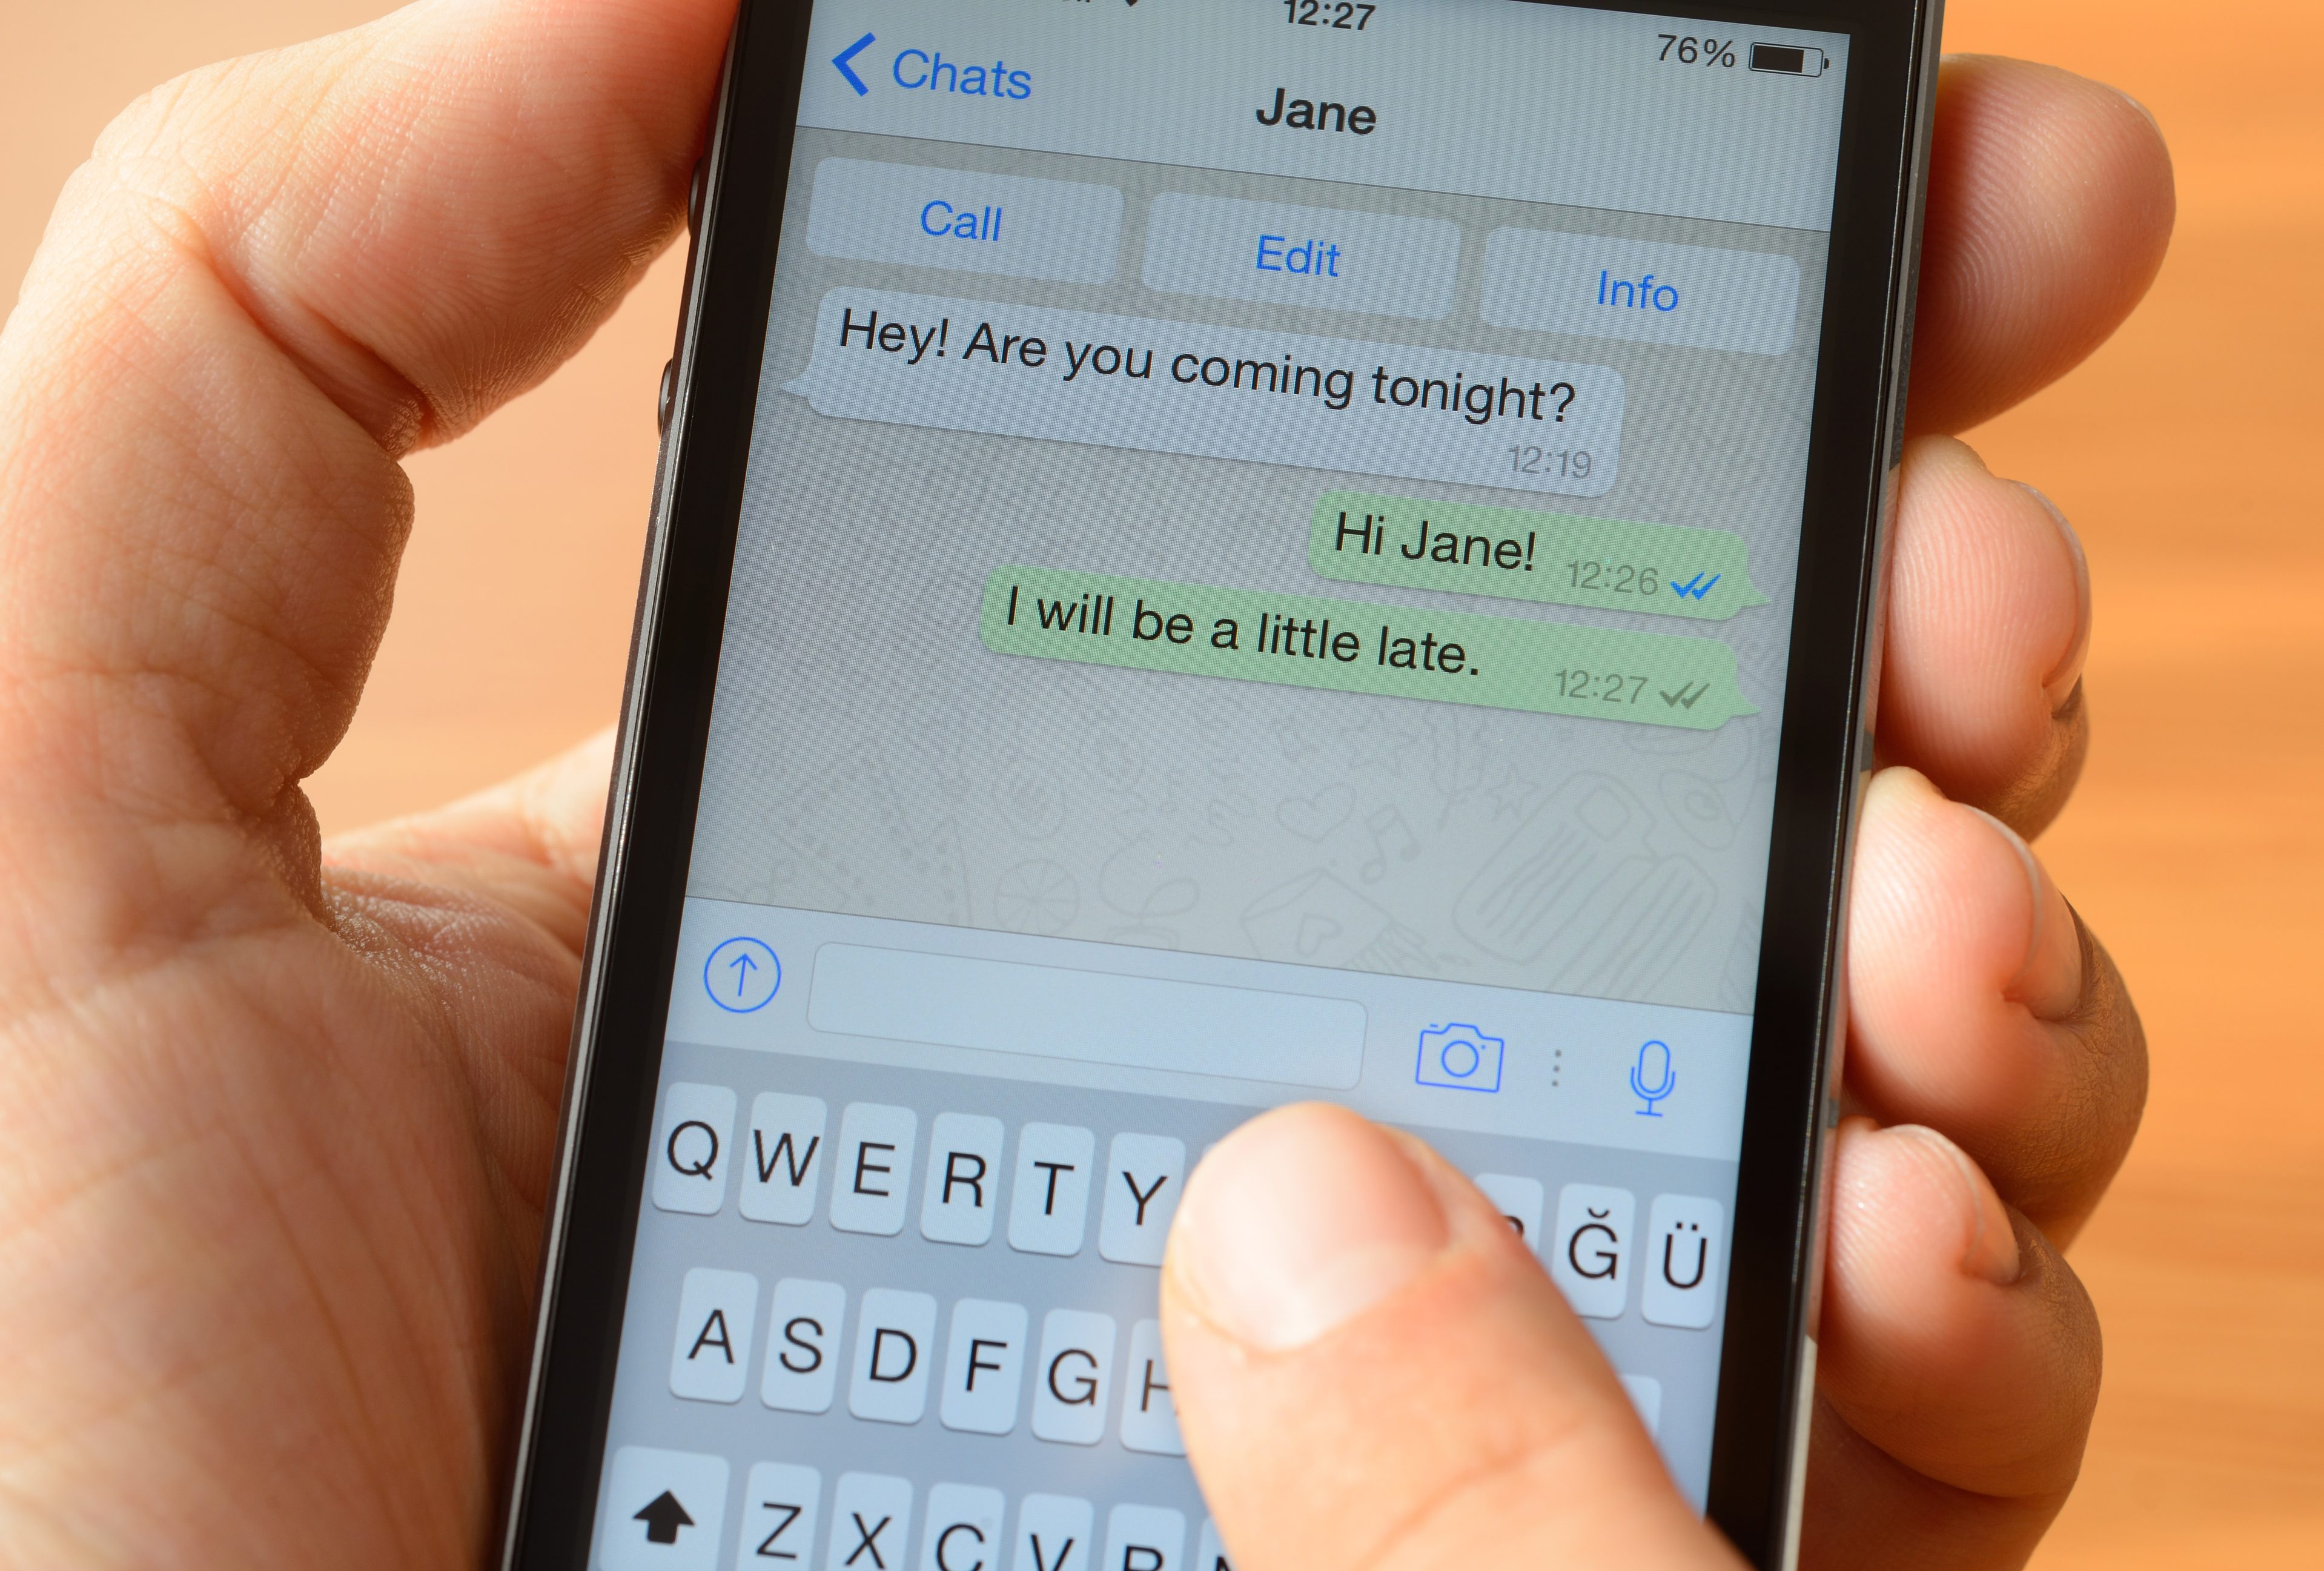 Online Dating: Do You Prefer Giving Out Your Number Before Or After Meeting In Person?